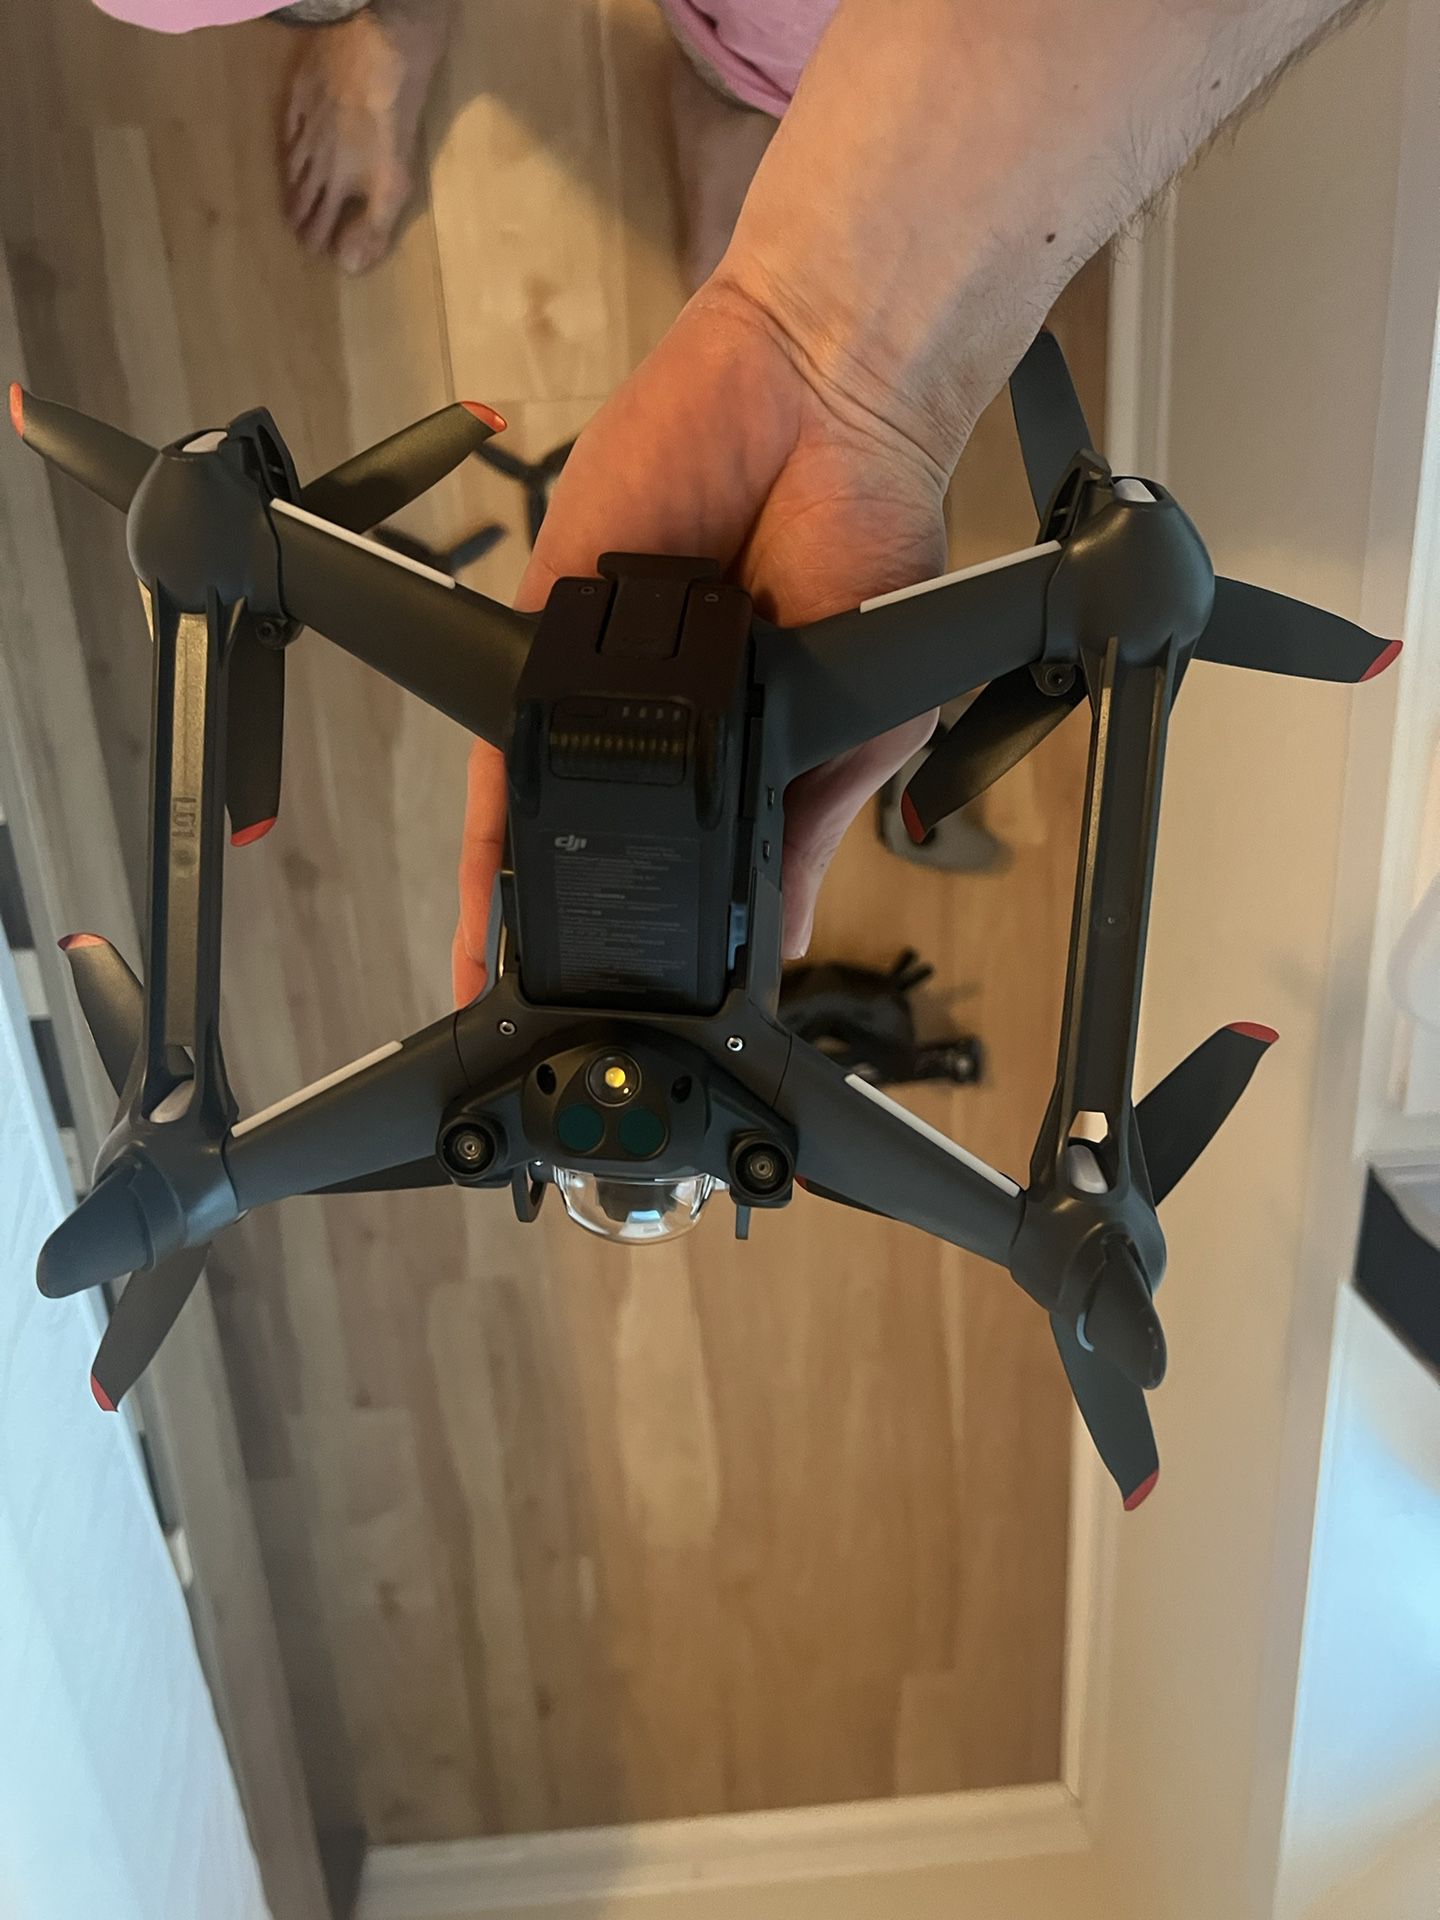 DJI FPV Drone With Goggles and 3 Batteries